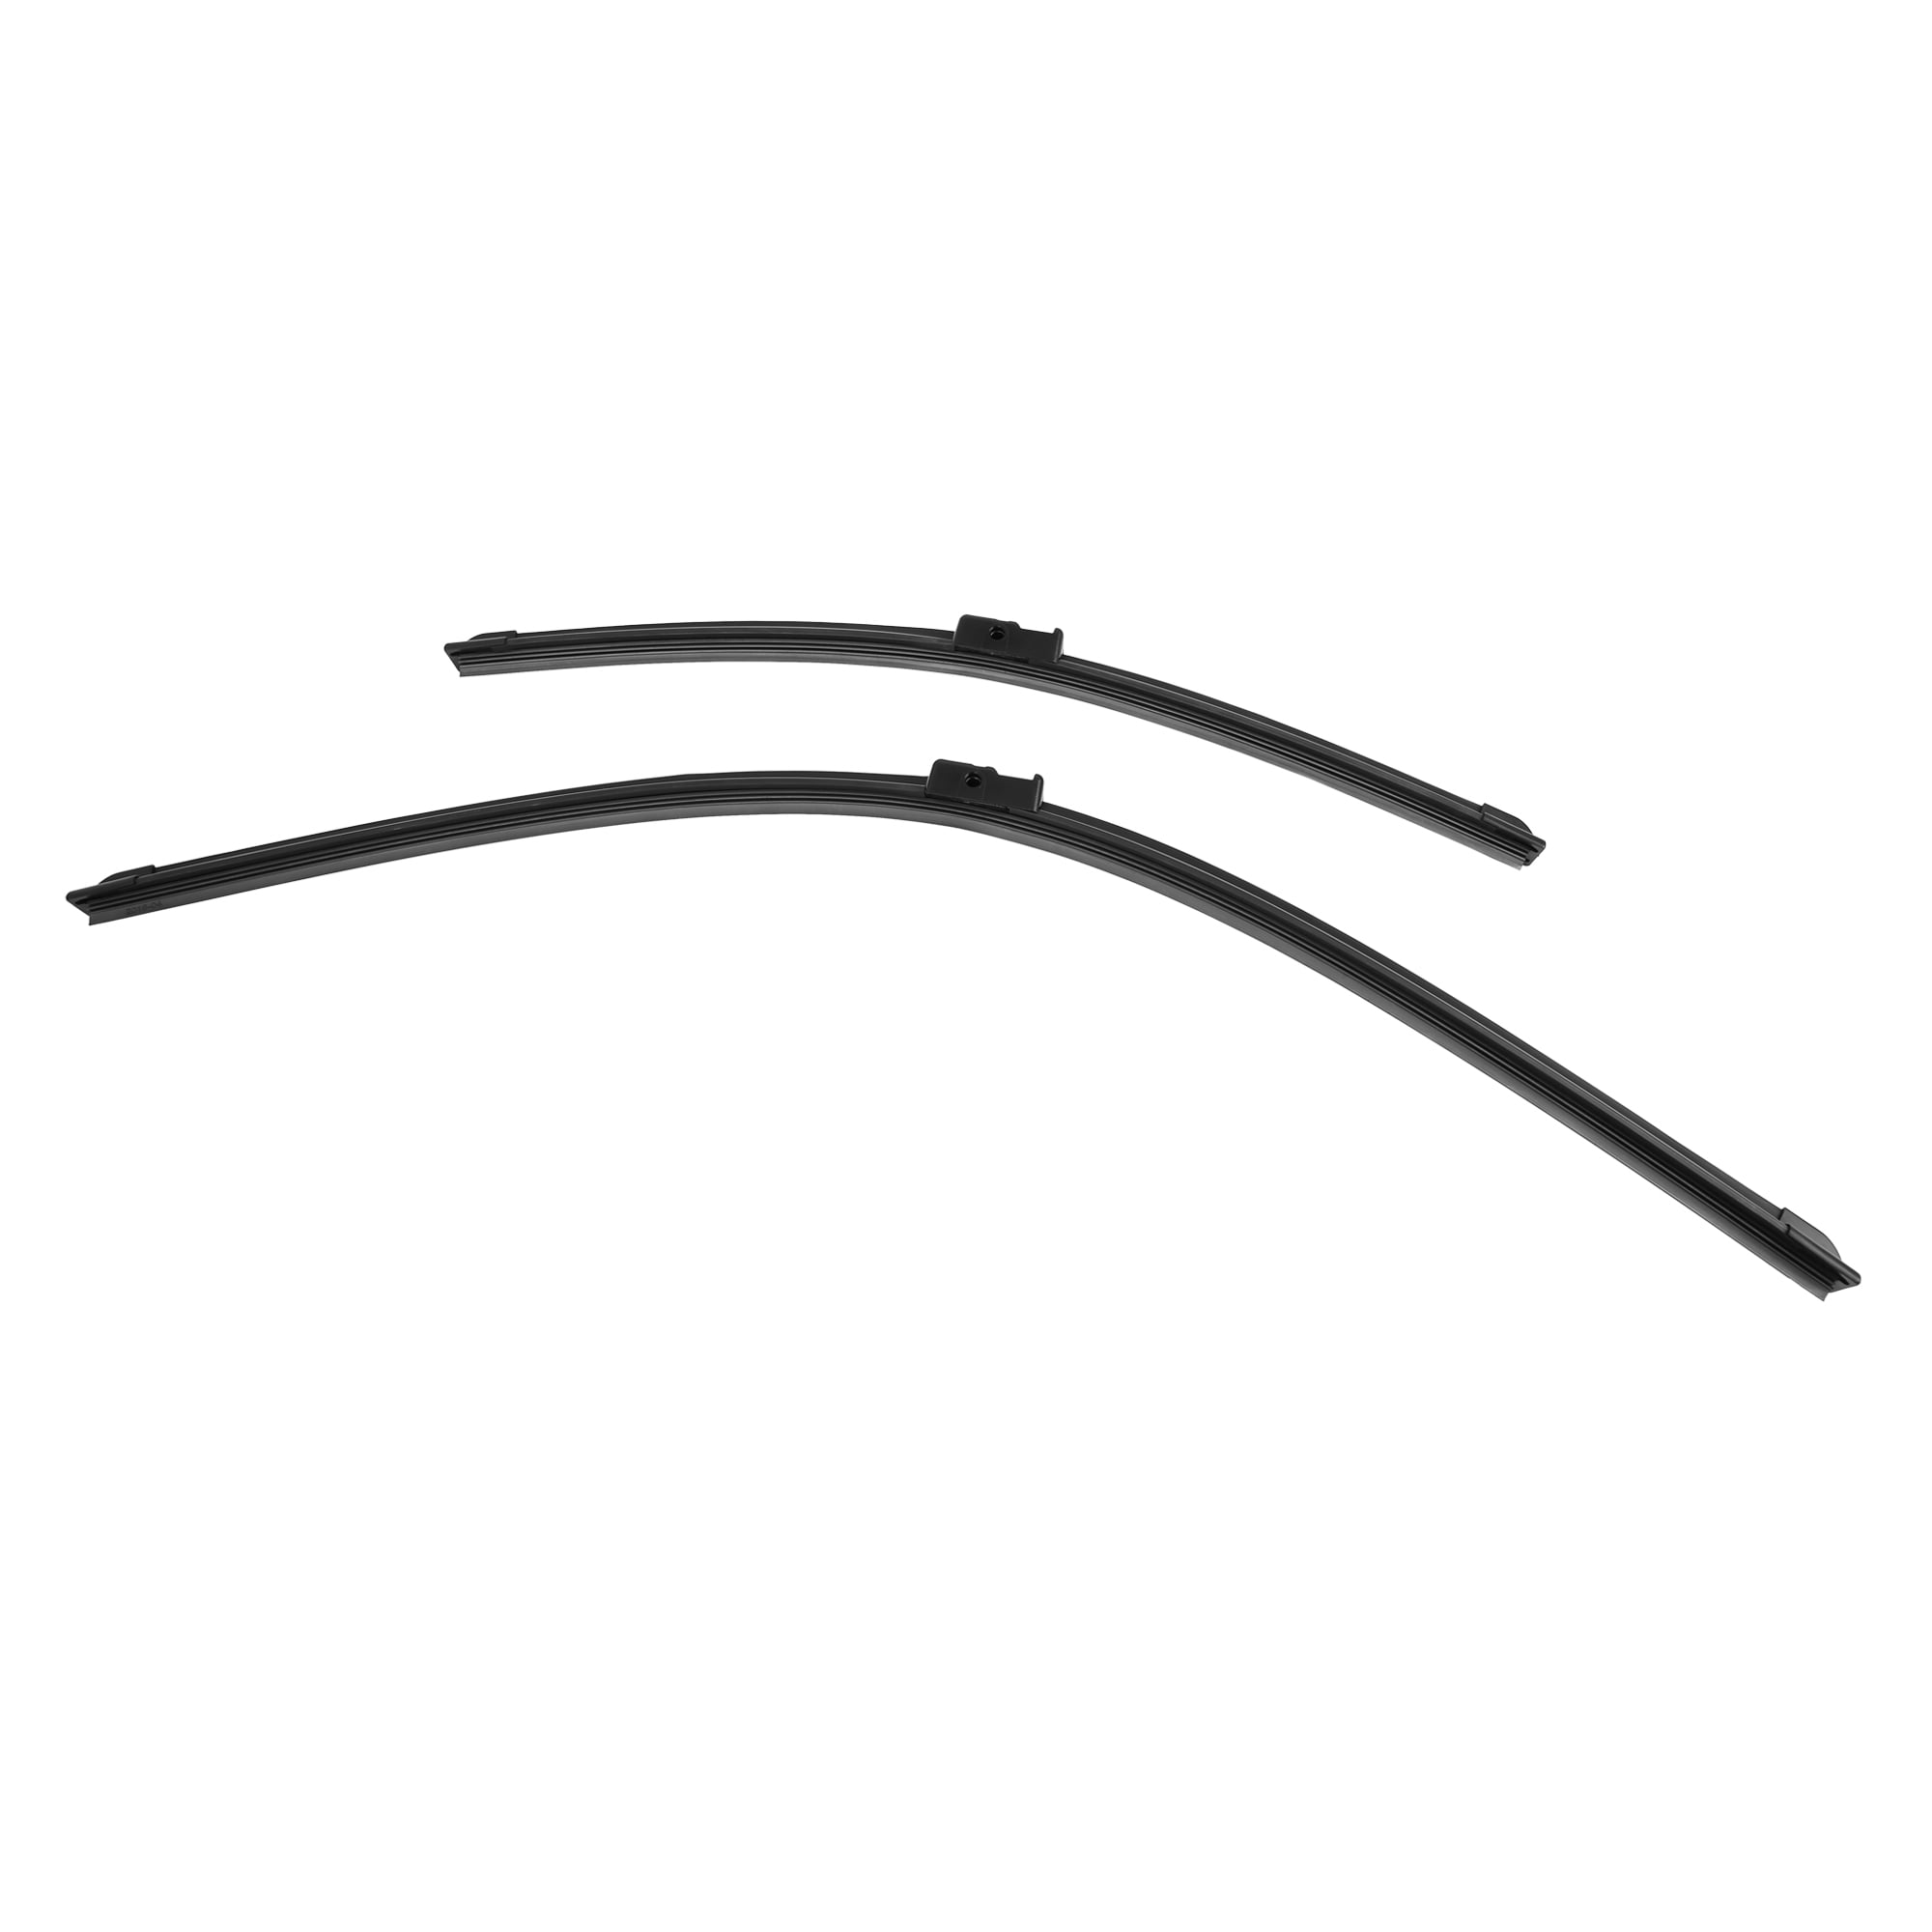 26" + 17" Front Windshield Wiper Blades for 2008-2011 Ford Focus - Walmart.com 2008 Ford Focus Se Windshield Wiper Size